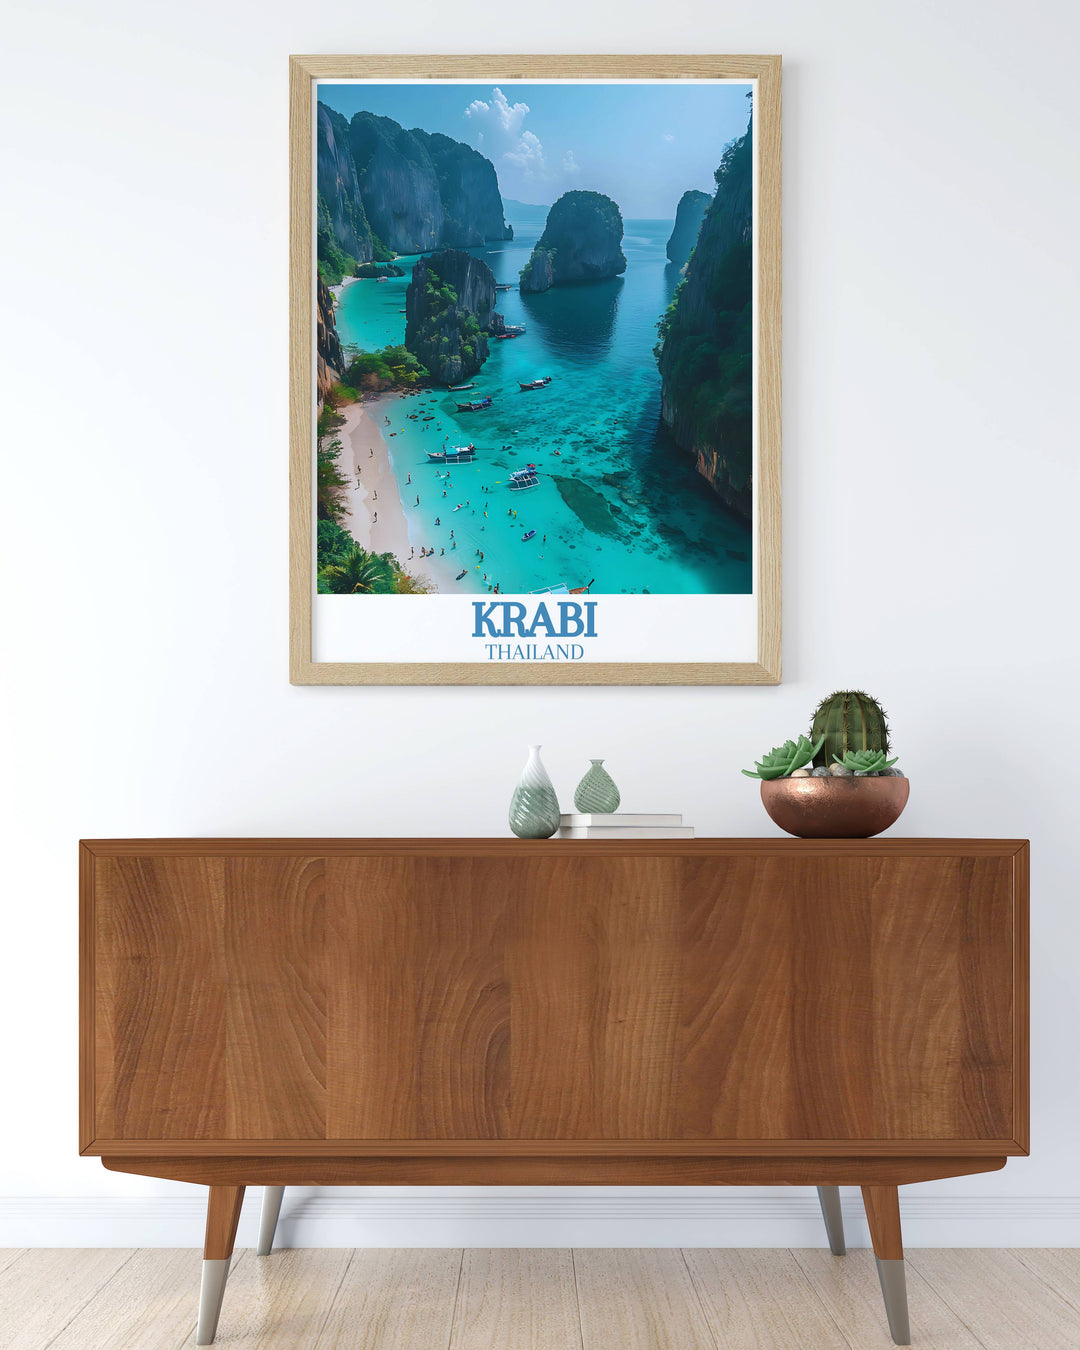 Enhance your living space with the breathtaking scenery of Krabi Island and Railay Beach depicted in this exquisite wall art print featuring tranquil beaches and stunning landscapes perfect for any room and a wonderful Thailand travel gift.